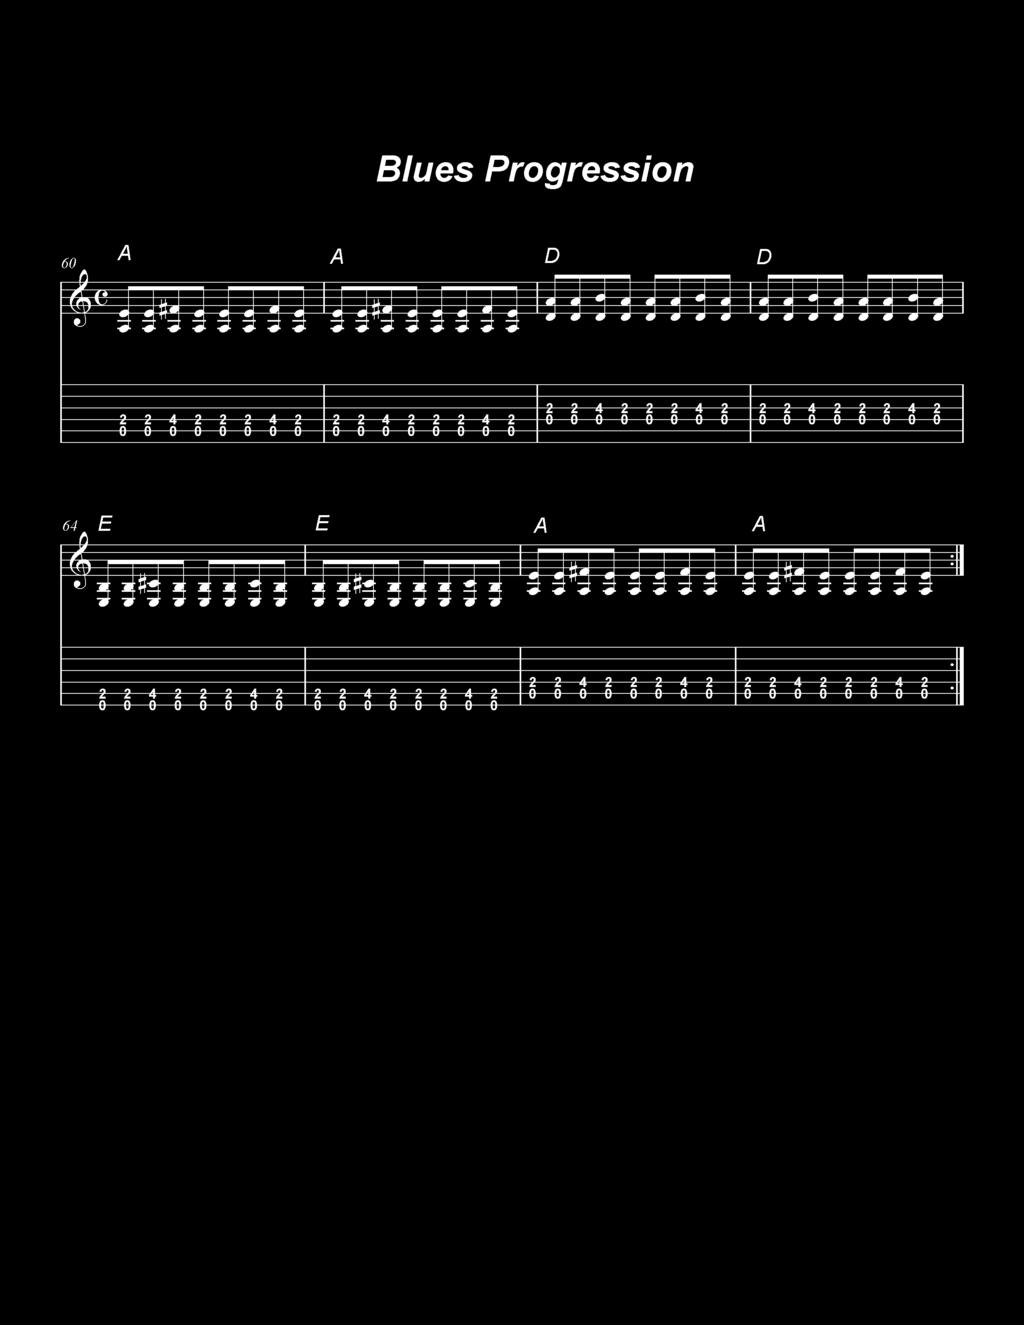 Blues Progression: If you listen to the blues, then you have heard power chords. Power chords are the easiest chords to play.